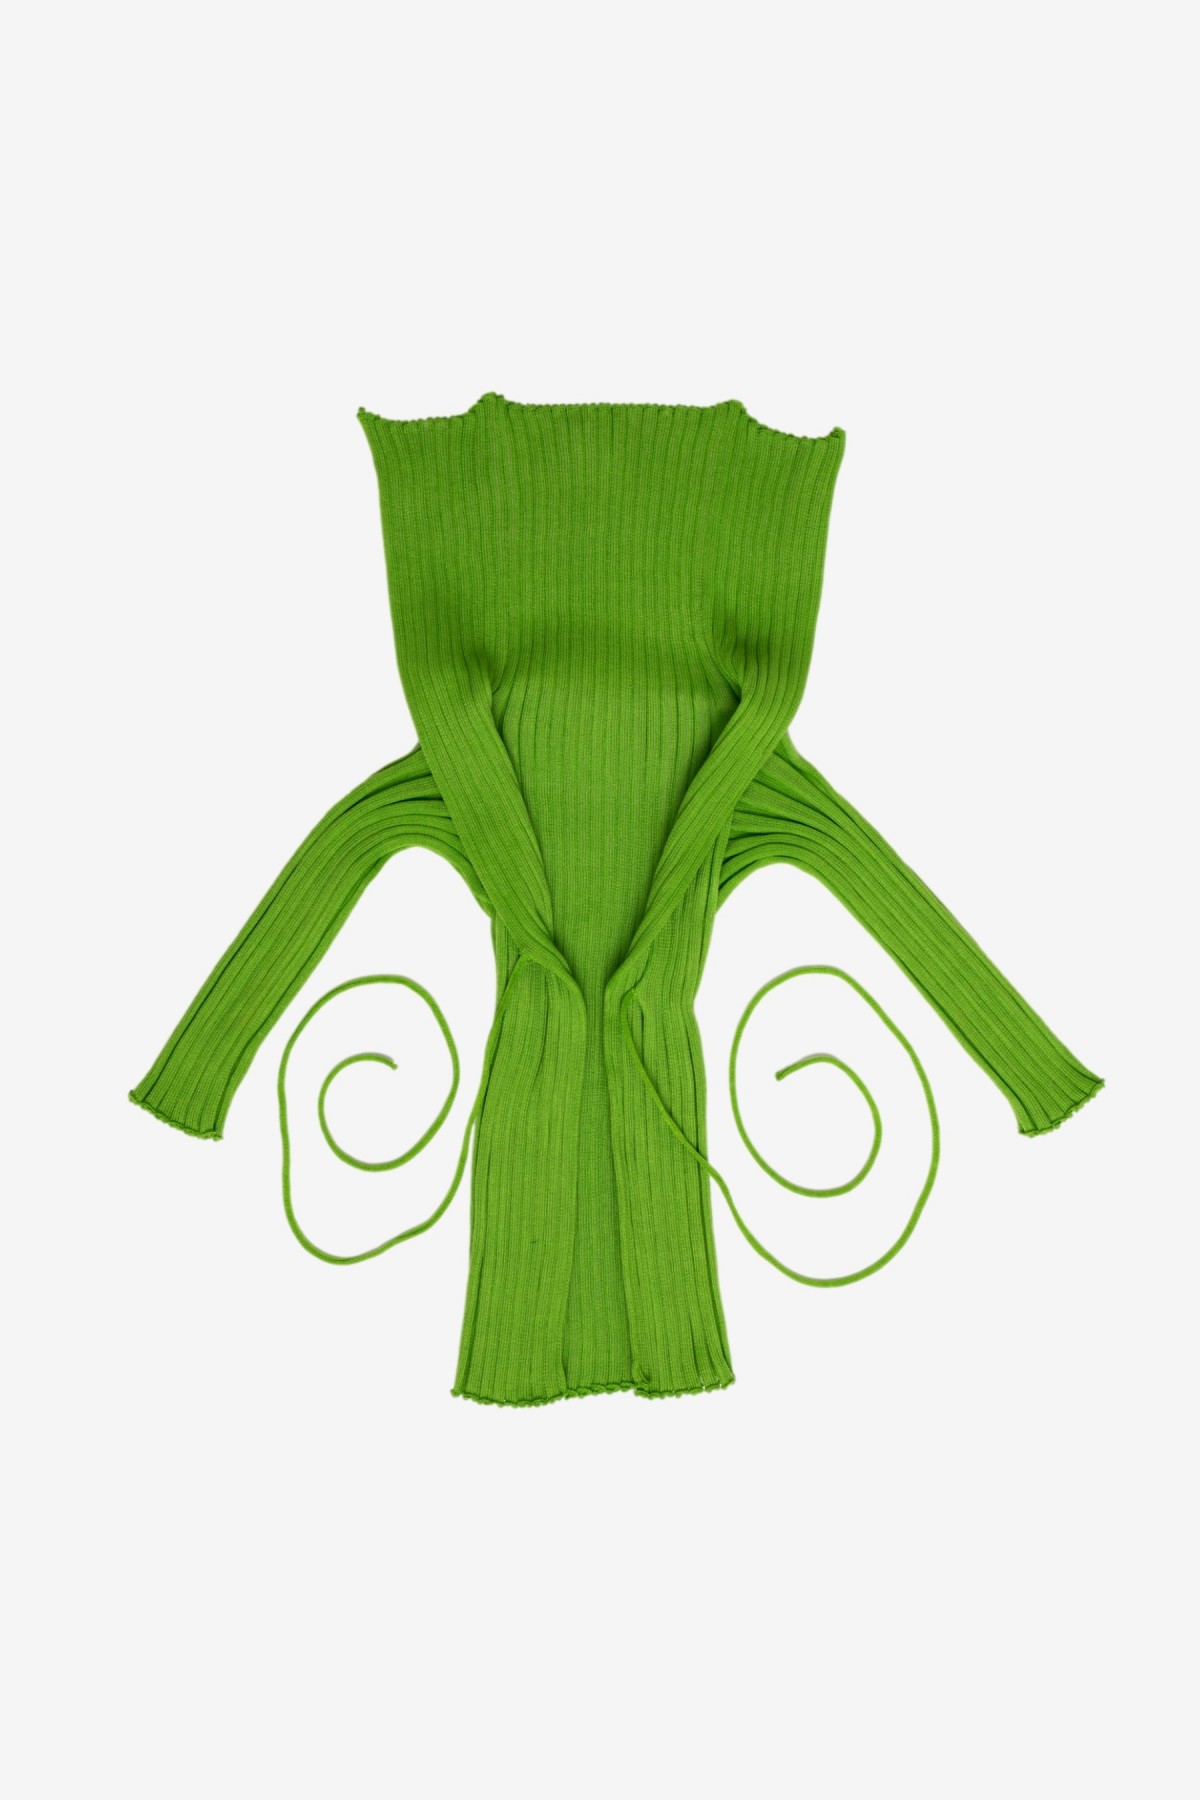 A. Roege Hove Ara Wide Collar Cardigan in Apple Green